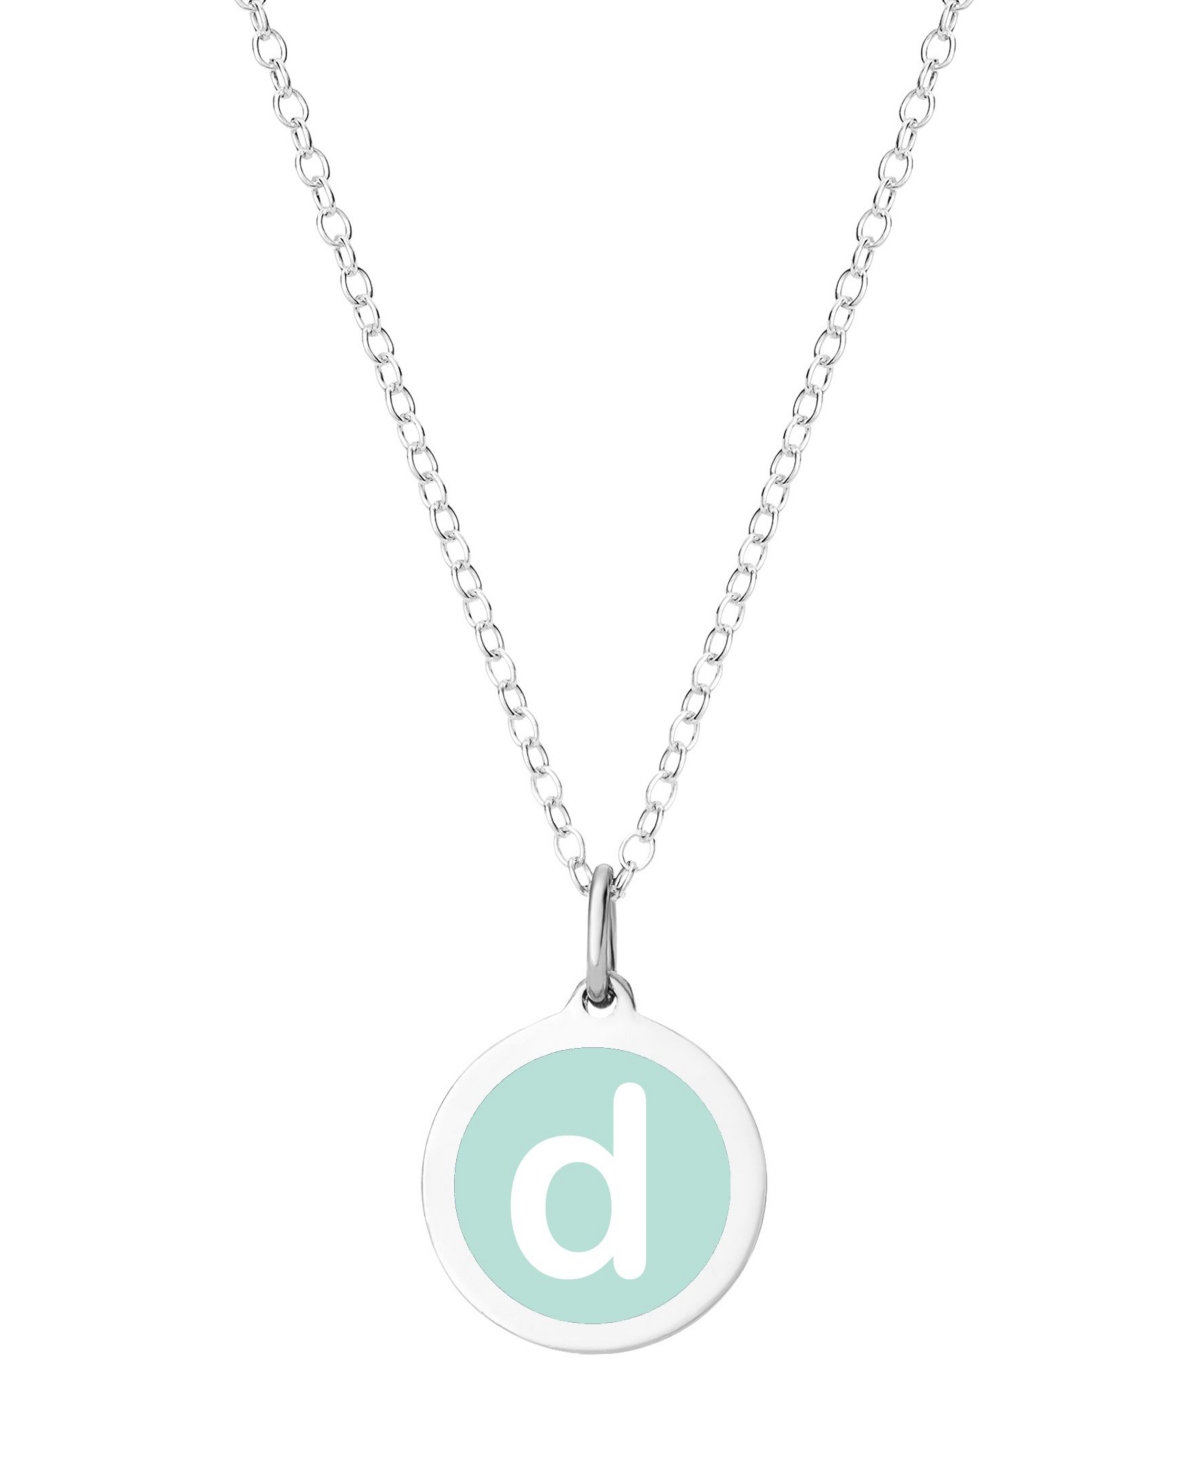 Mini Initial Pendant Necklace in Sterling Silver and Mint Enamel, 16" + 2" Extender - Mint-Z